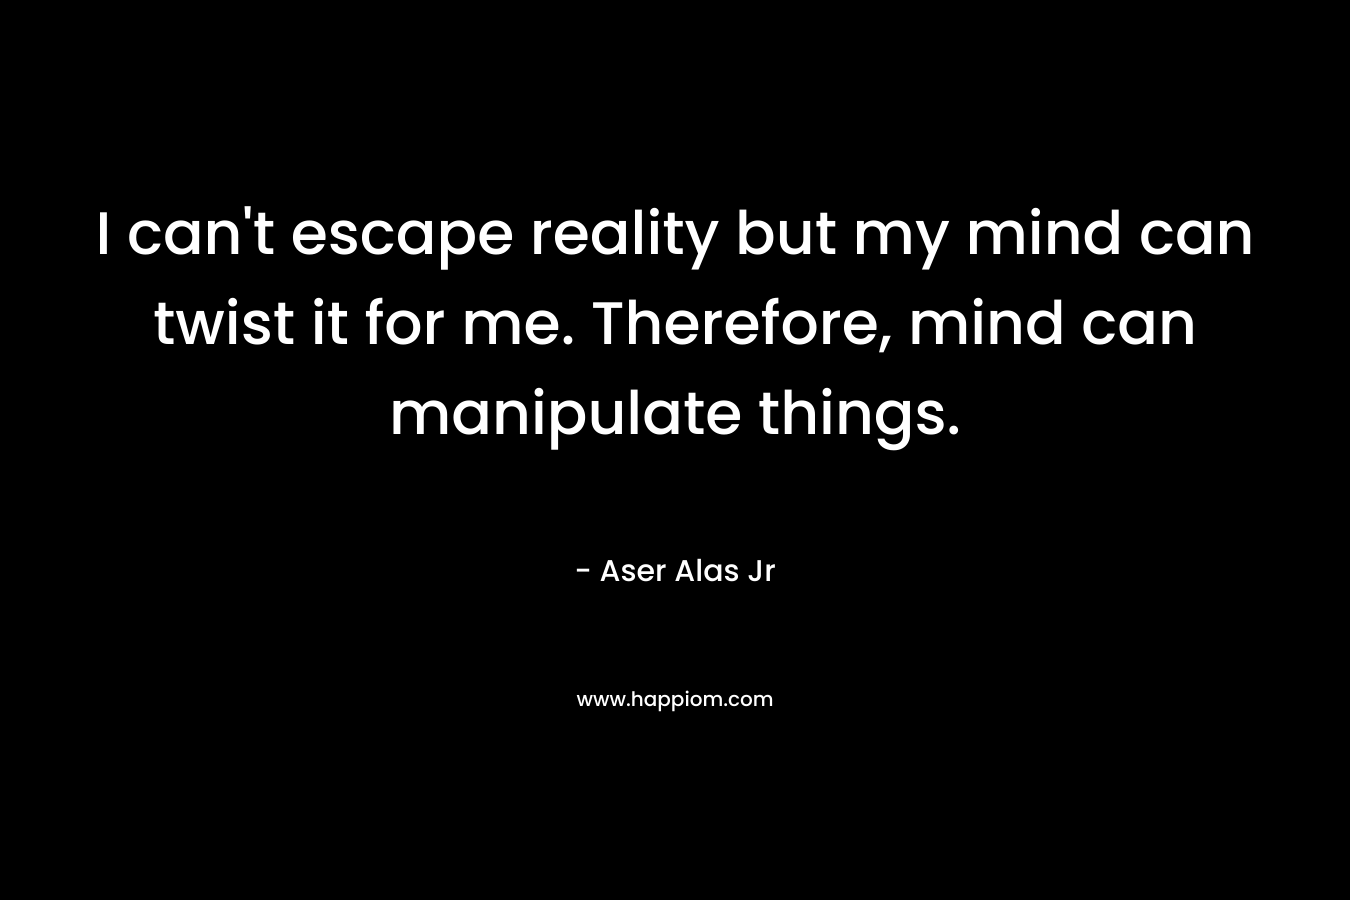 I can't escape reality but my mind can twist it for me. Therefore, mind can manipulate things.